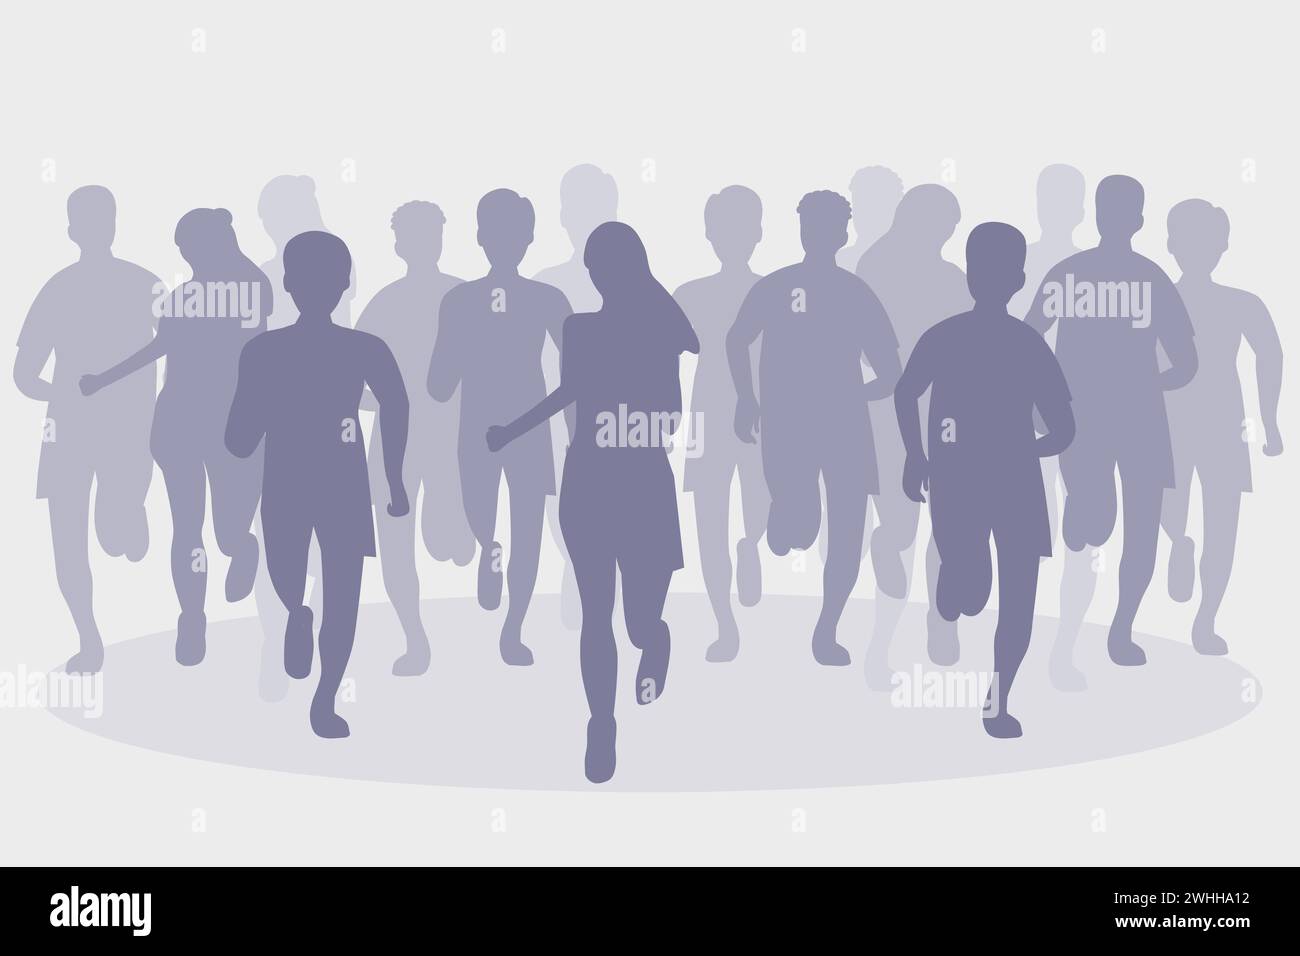 Group of marathon runners. Silhouette of a crowd of people running. Sport illustration. Stock Vector